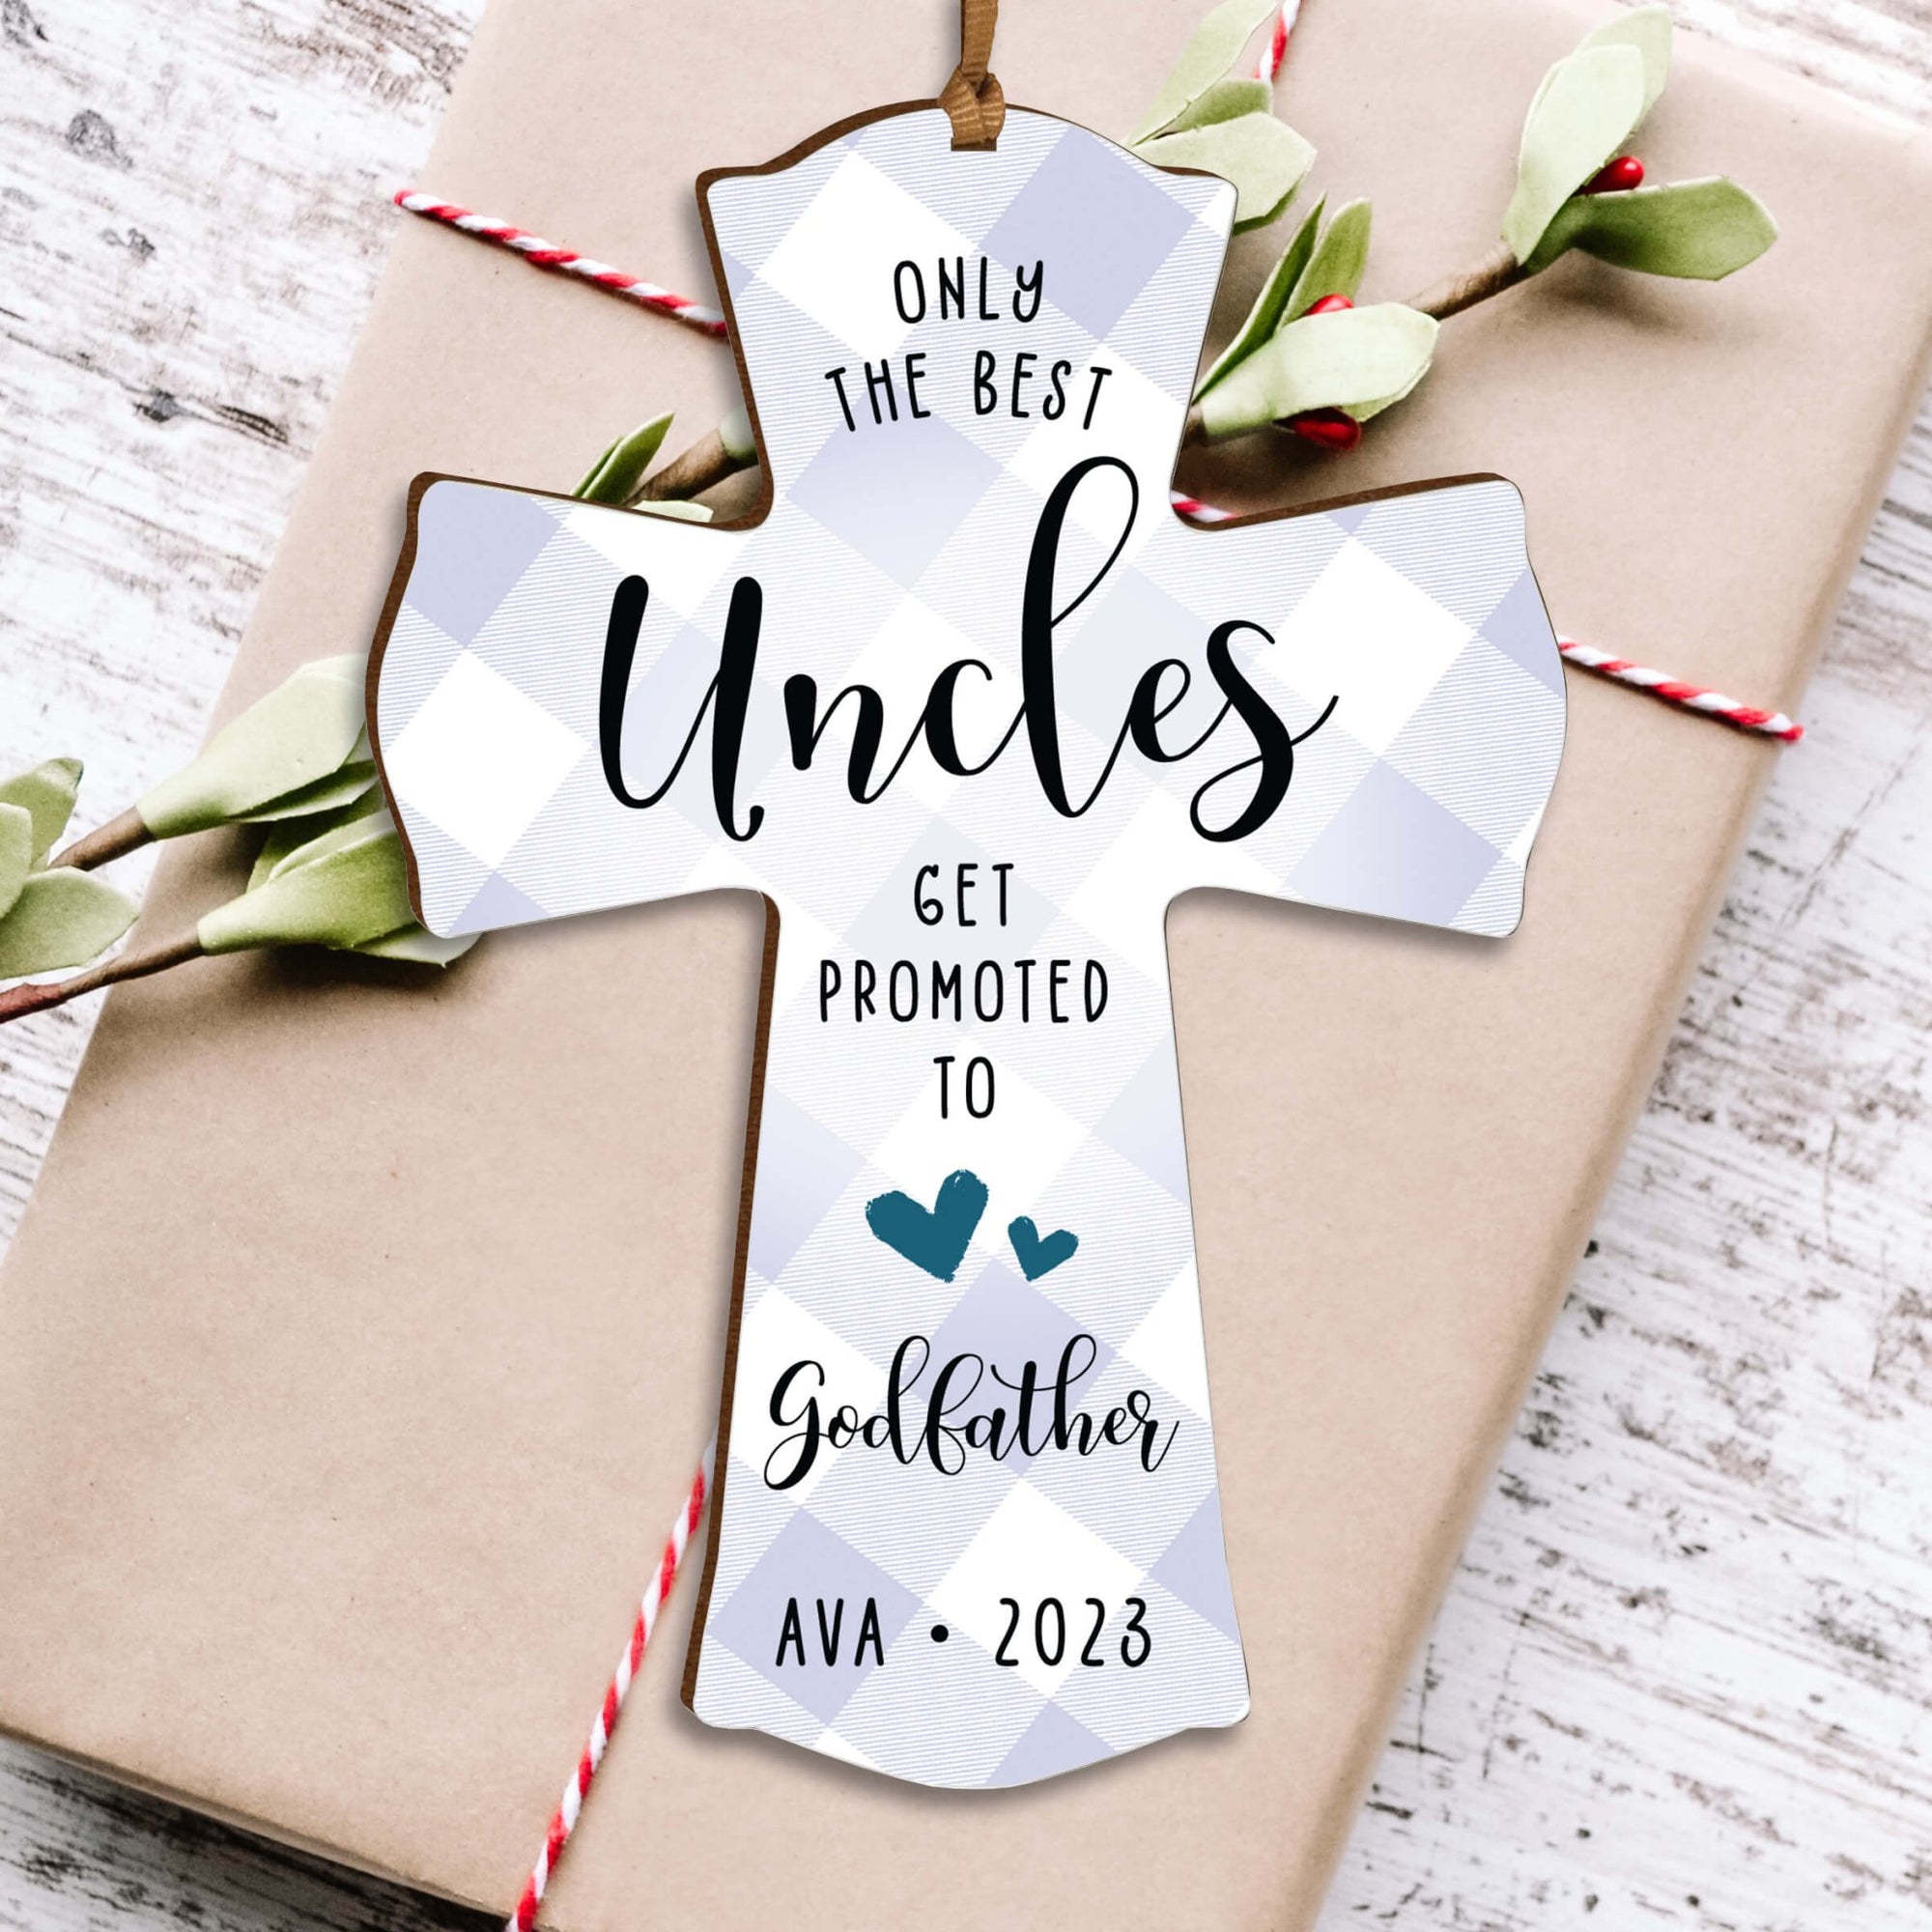 Personalized Wooden Hanging Mini Cross for Godfather - LifeSong Milestones